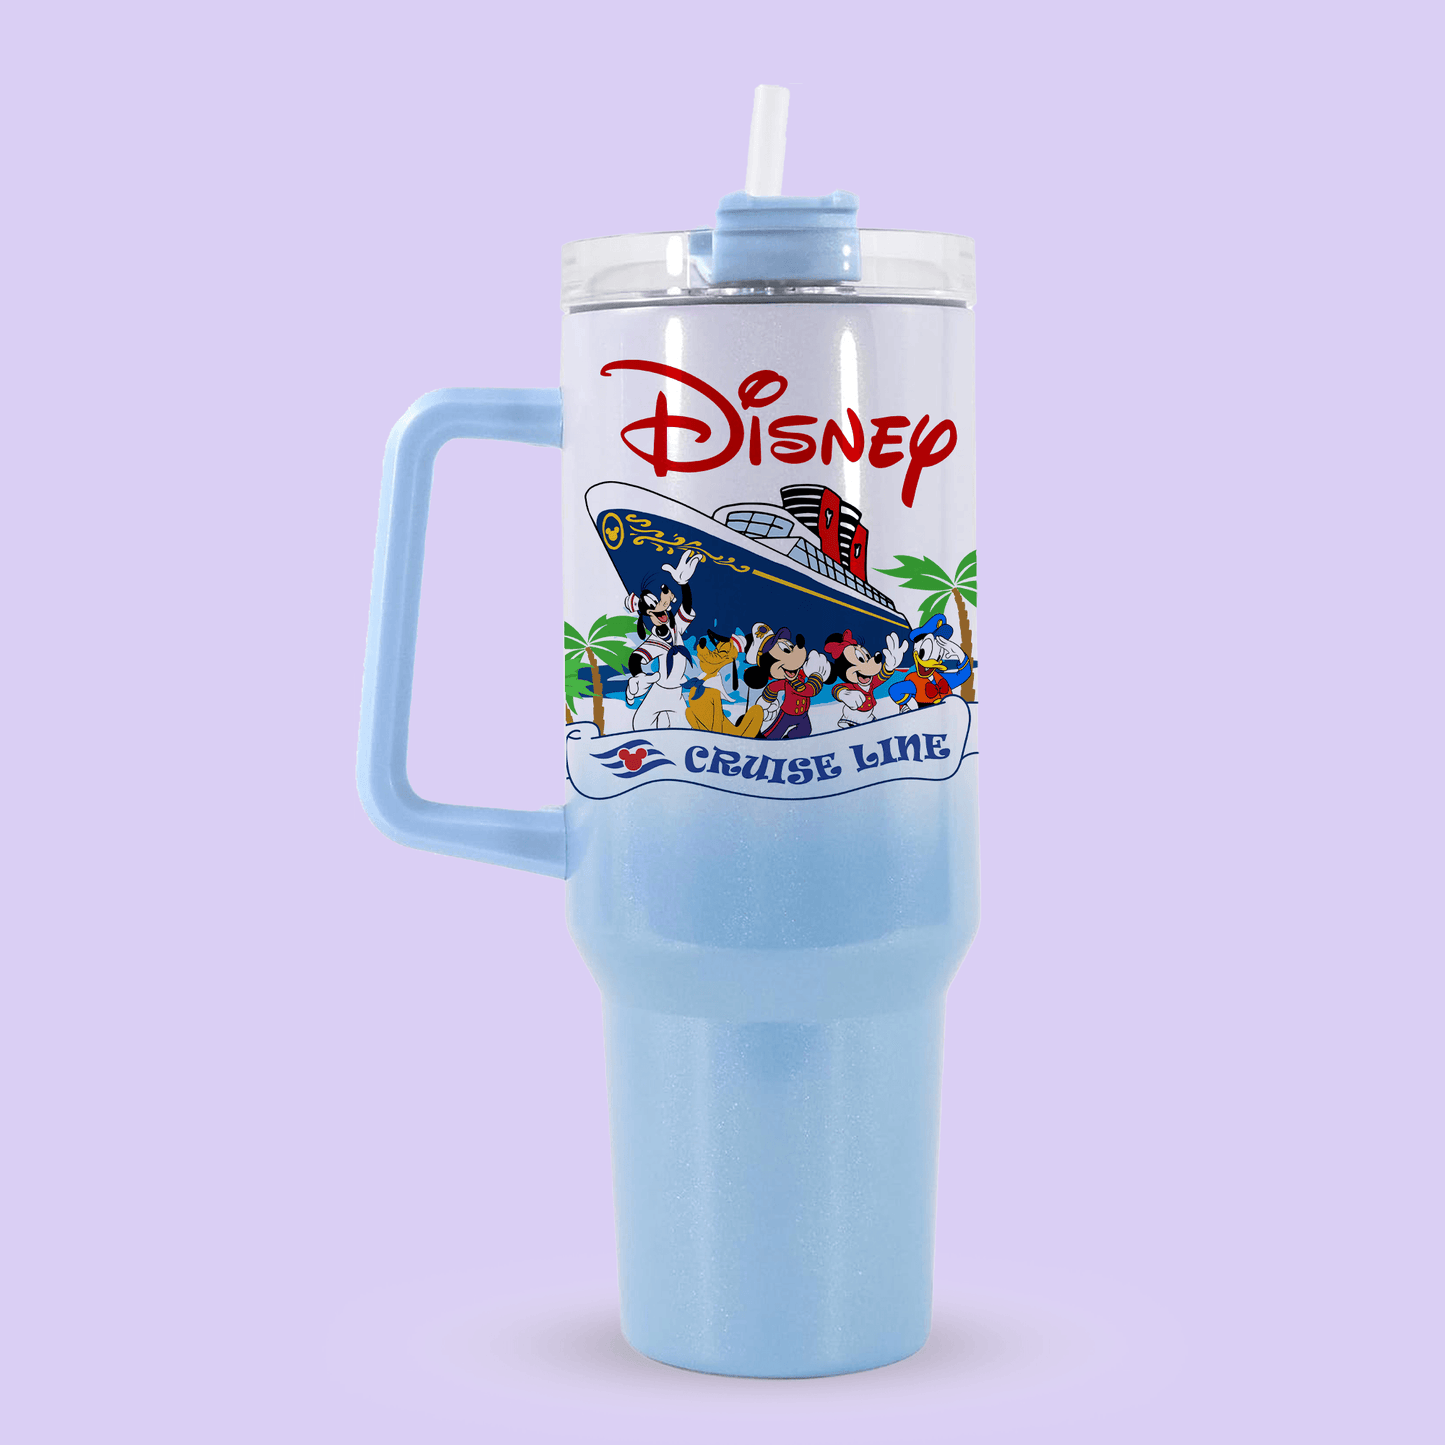 Disney Cruise Line 40oz Quencher Tumbler - Two Crafty Gays